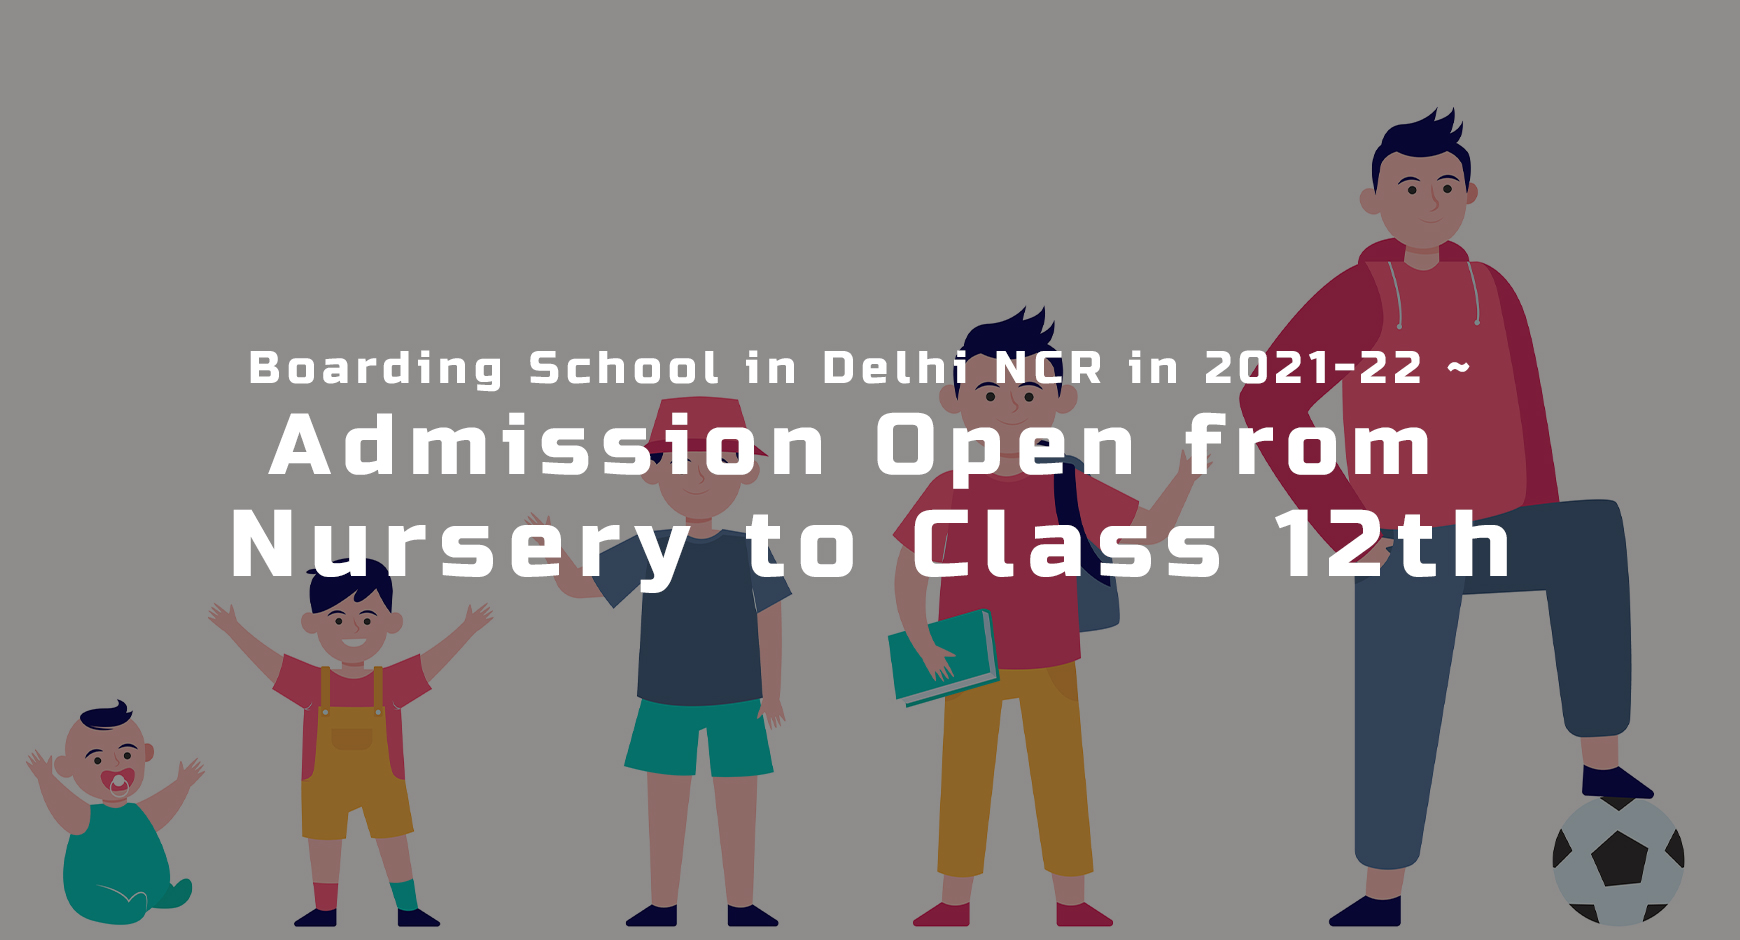 CSKM School - Boarding School in Delhi NCR in 2021-22 ~ Admission Open from Nursery to Class 12th